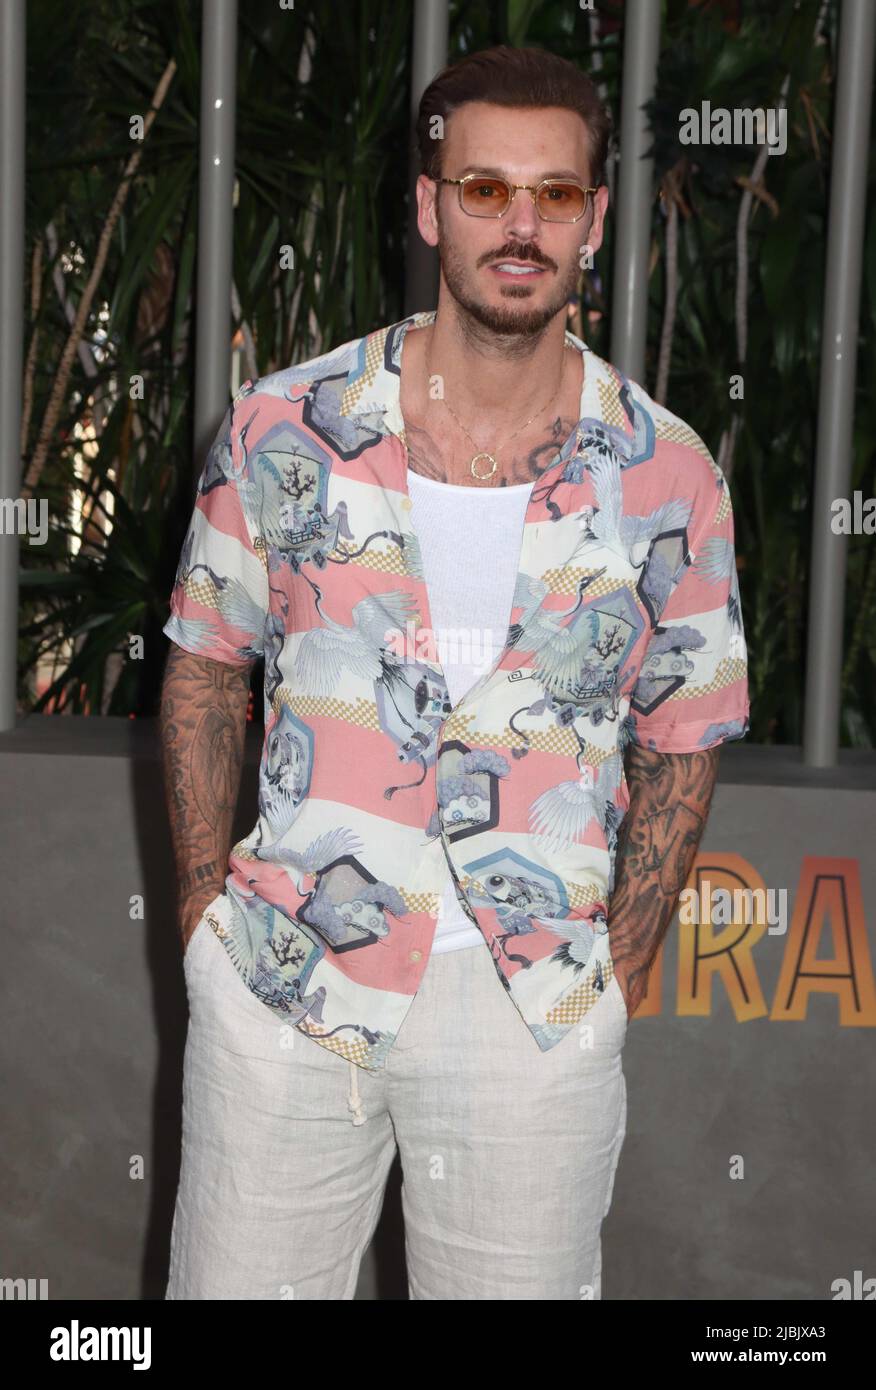 Hollywood, USA. 06th June, 2022. Matt Pokora 06/06/2022 The World Premiere of 'Jurassic World Dominion' at the TCL Chinese Theatre in Hollywood, CA Photo by Izumi Hasegawa/Hollywood News Wire Inc. Credit: Hollywood News Wire Inc./Alamy Live News Stock Photo